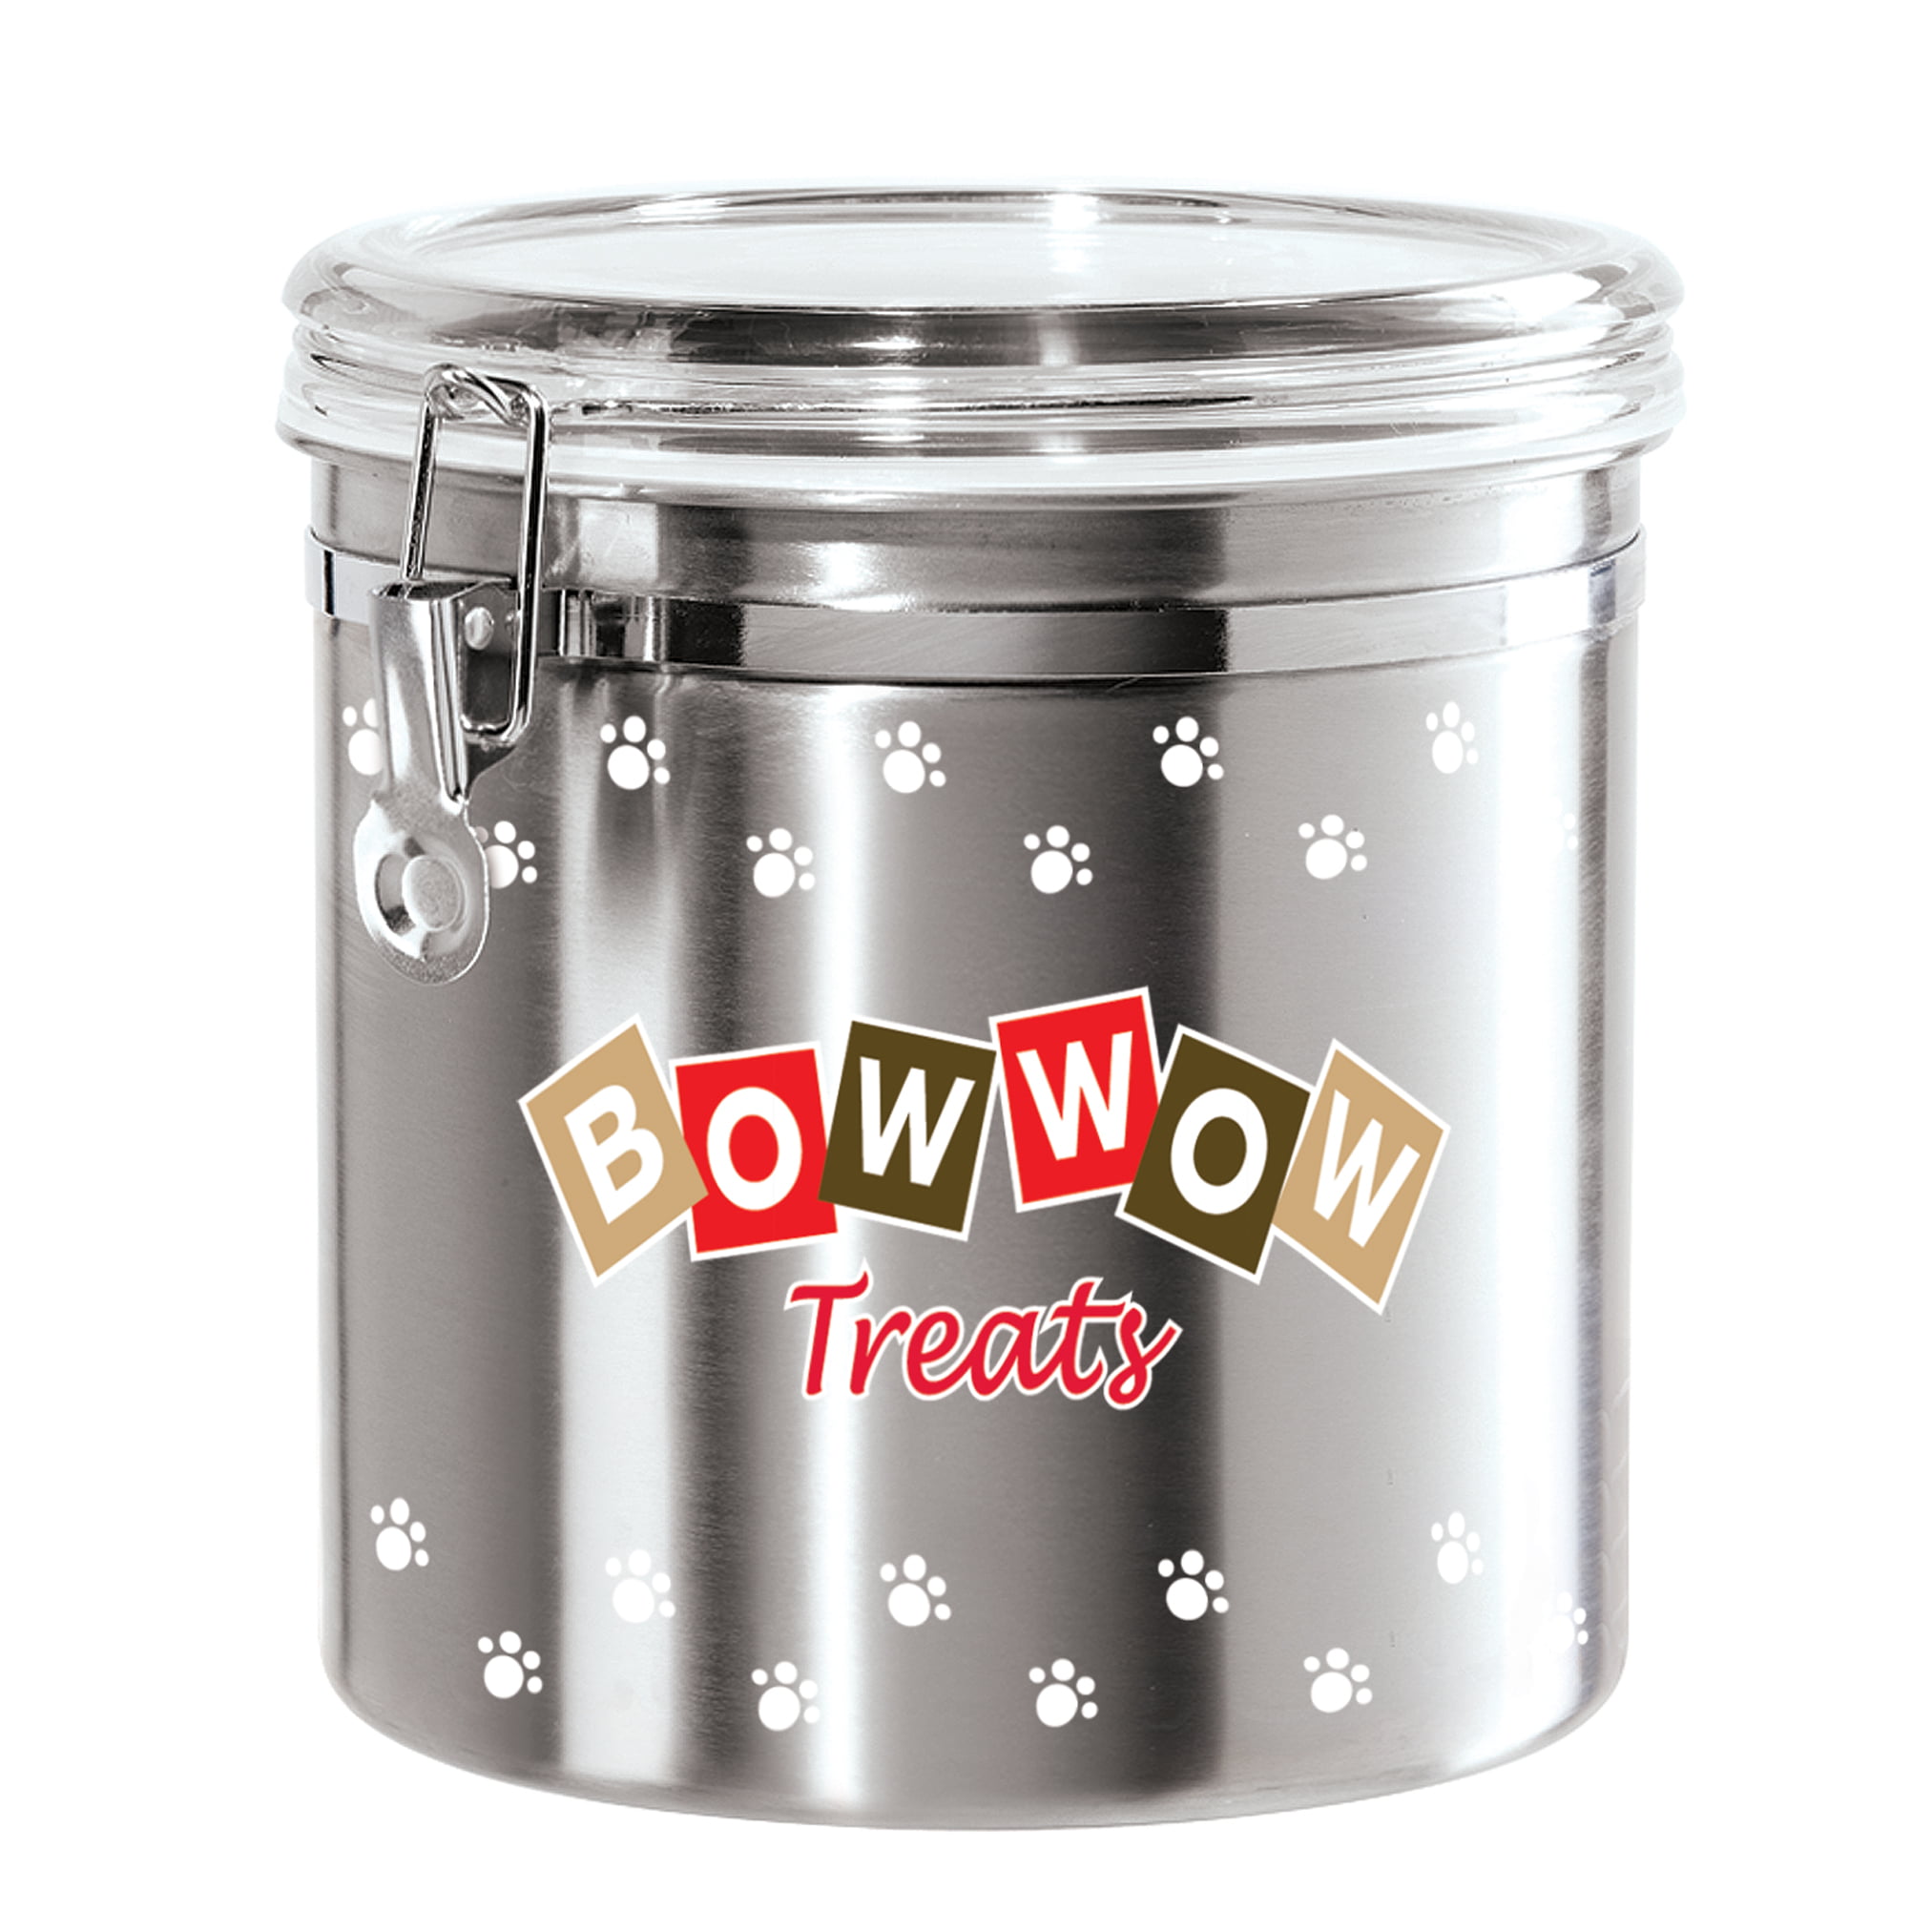 Oggi 8314 Jumbo Airtight Stainless Steel Pet Treat Canister with Bow Wow Motif-Clear Acrylic Flip-Top Lid and Locking Clamp Closure 130 oz Silver 